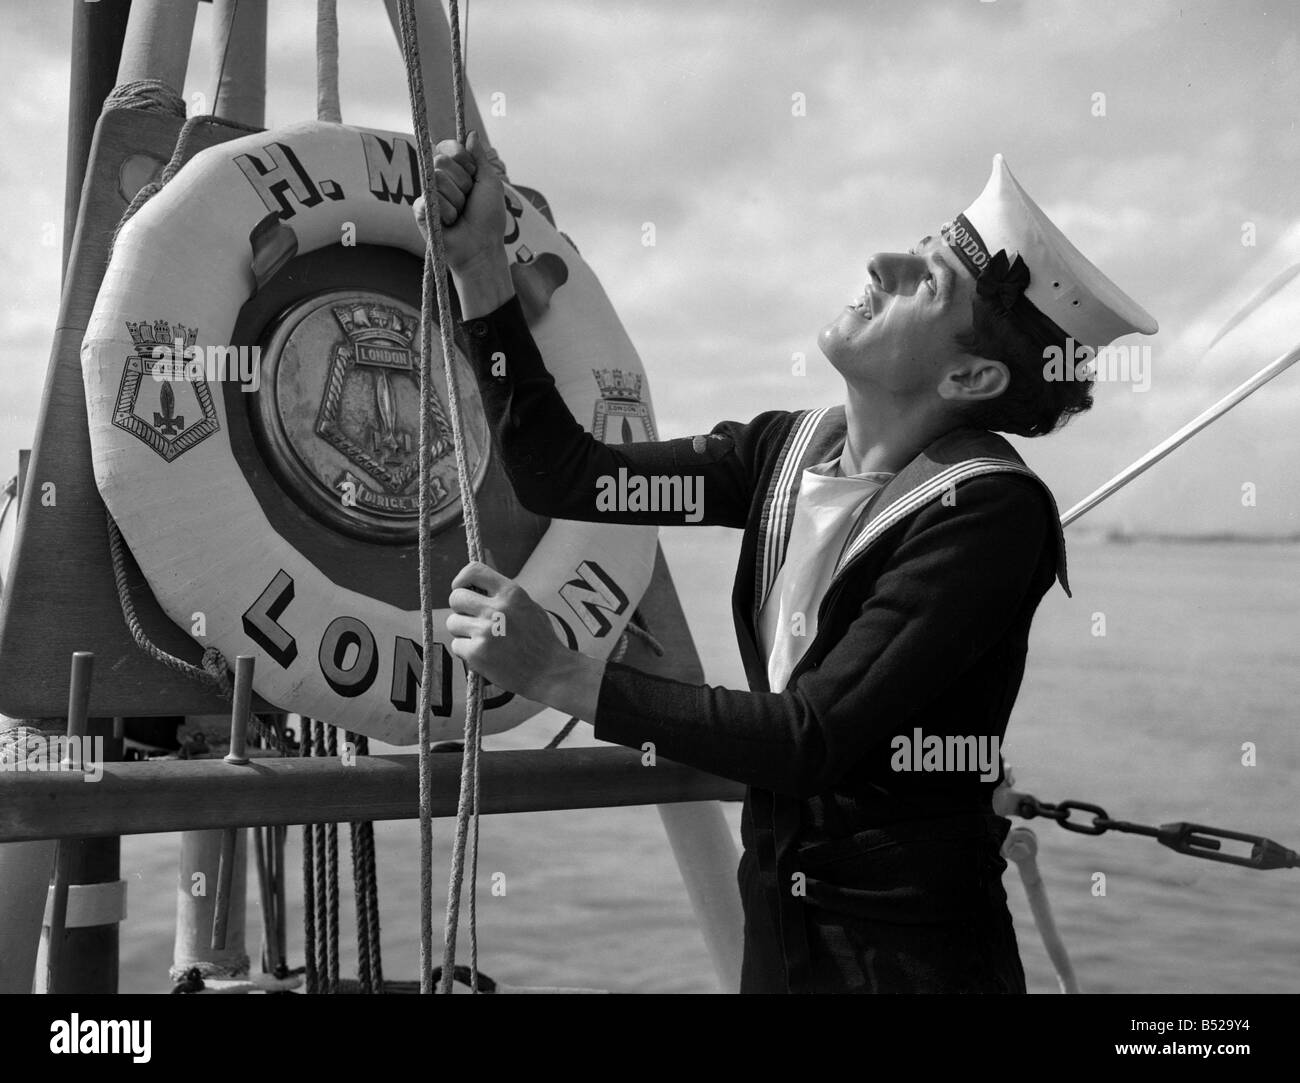 A naval rating raising the white ensign aboard the County Class cruiser HMS London which was damaged in the rescue attempt of HMS Amethyst in the Yangtze river Royal Navy pulling on rope lift belt ships crest sailor 1940s Stock Photo